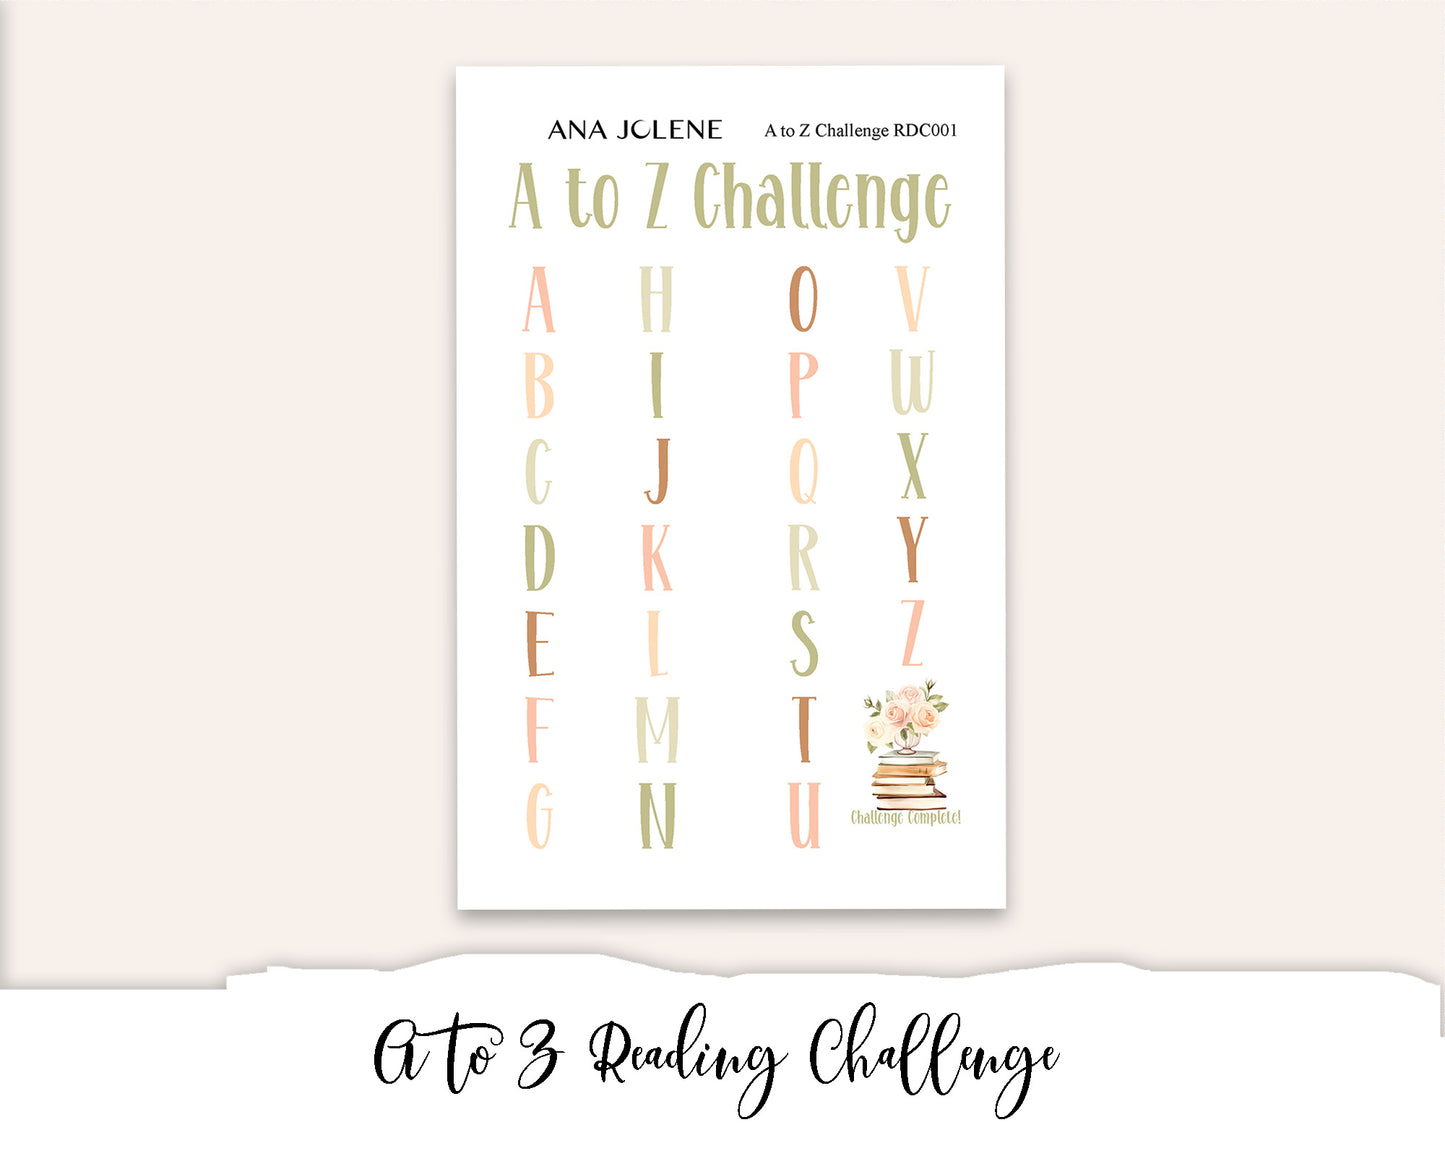 A to Z Reading Challenge - A5 Reading Journal